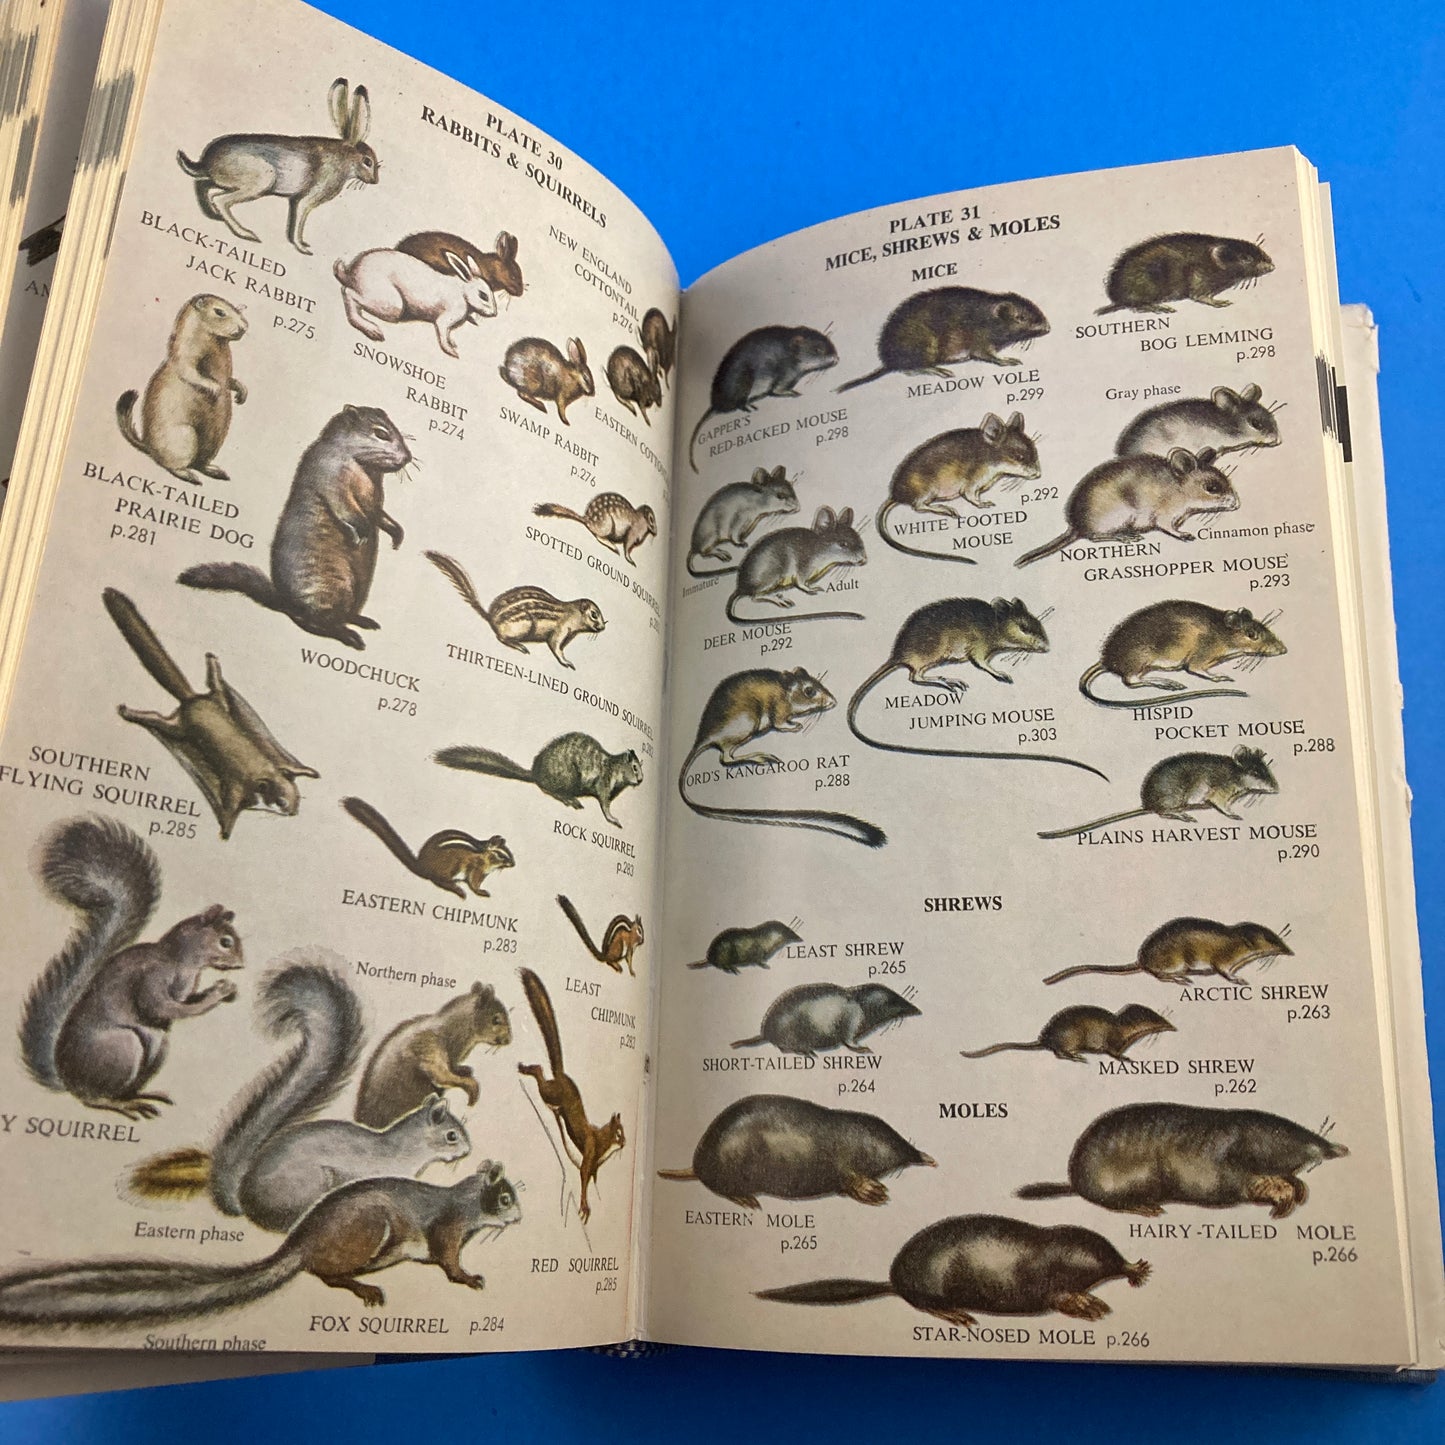 Complete Field Guide to American Wildlife